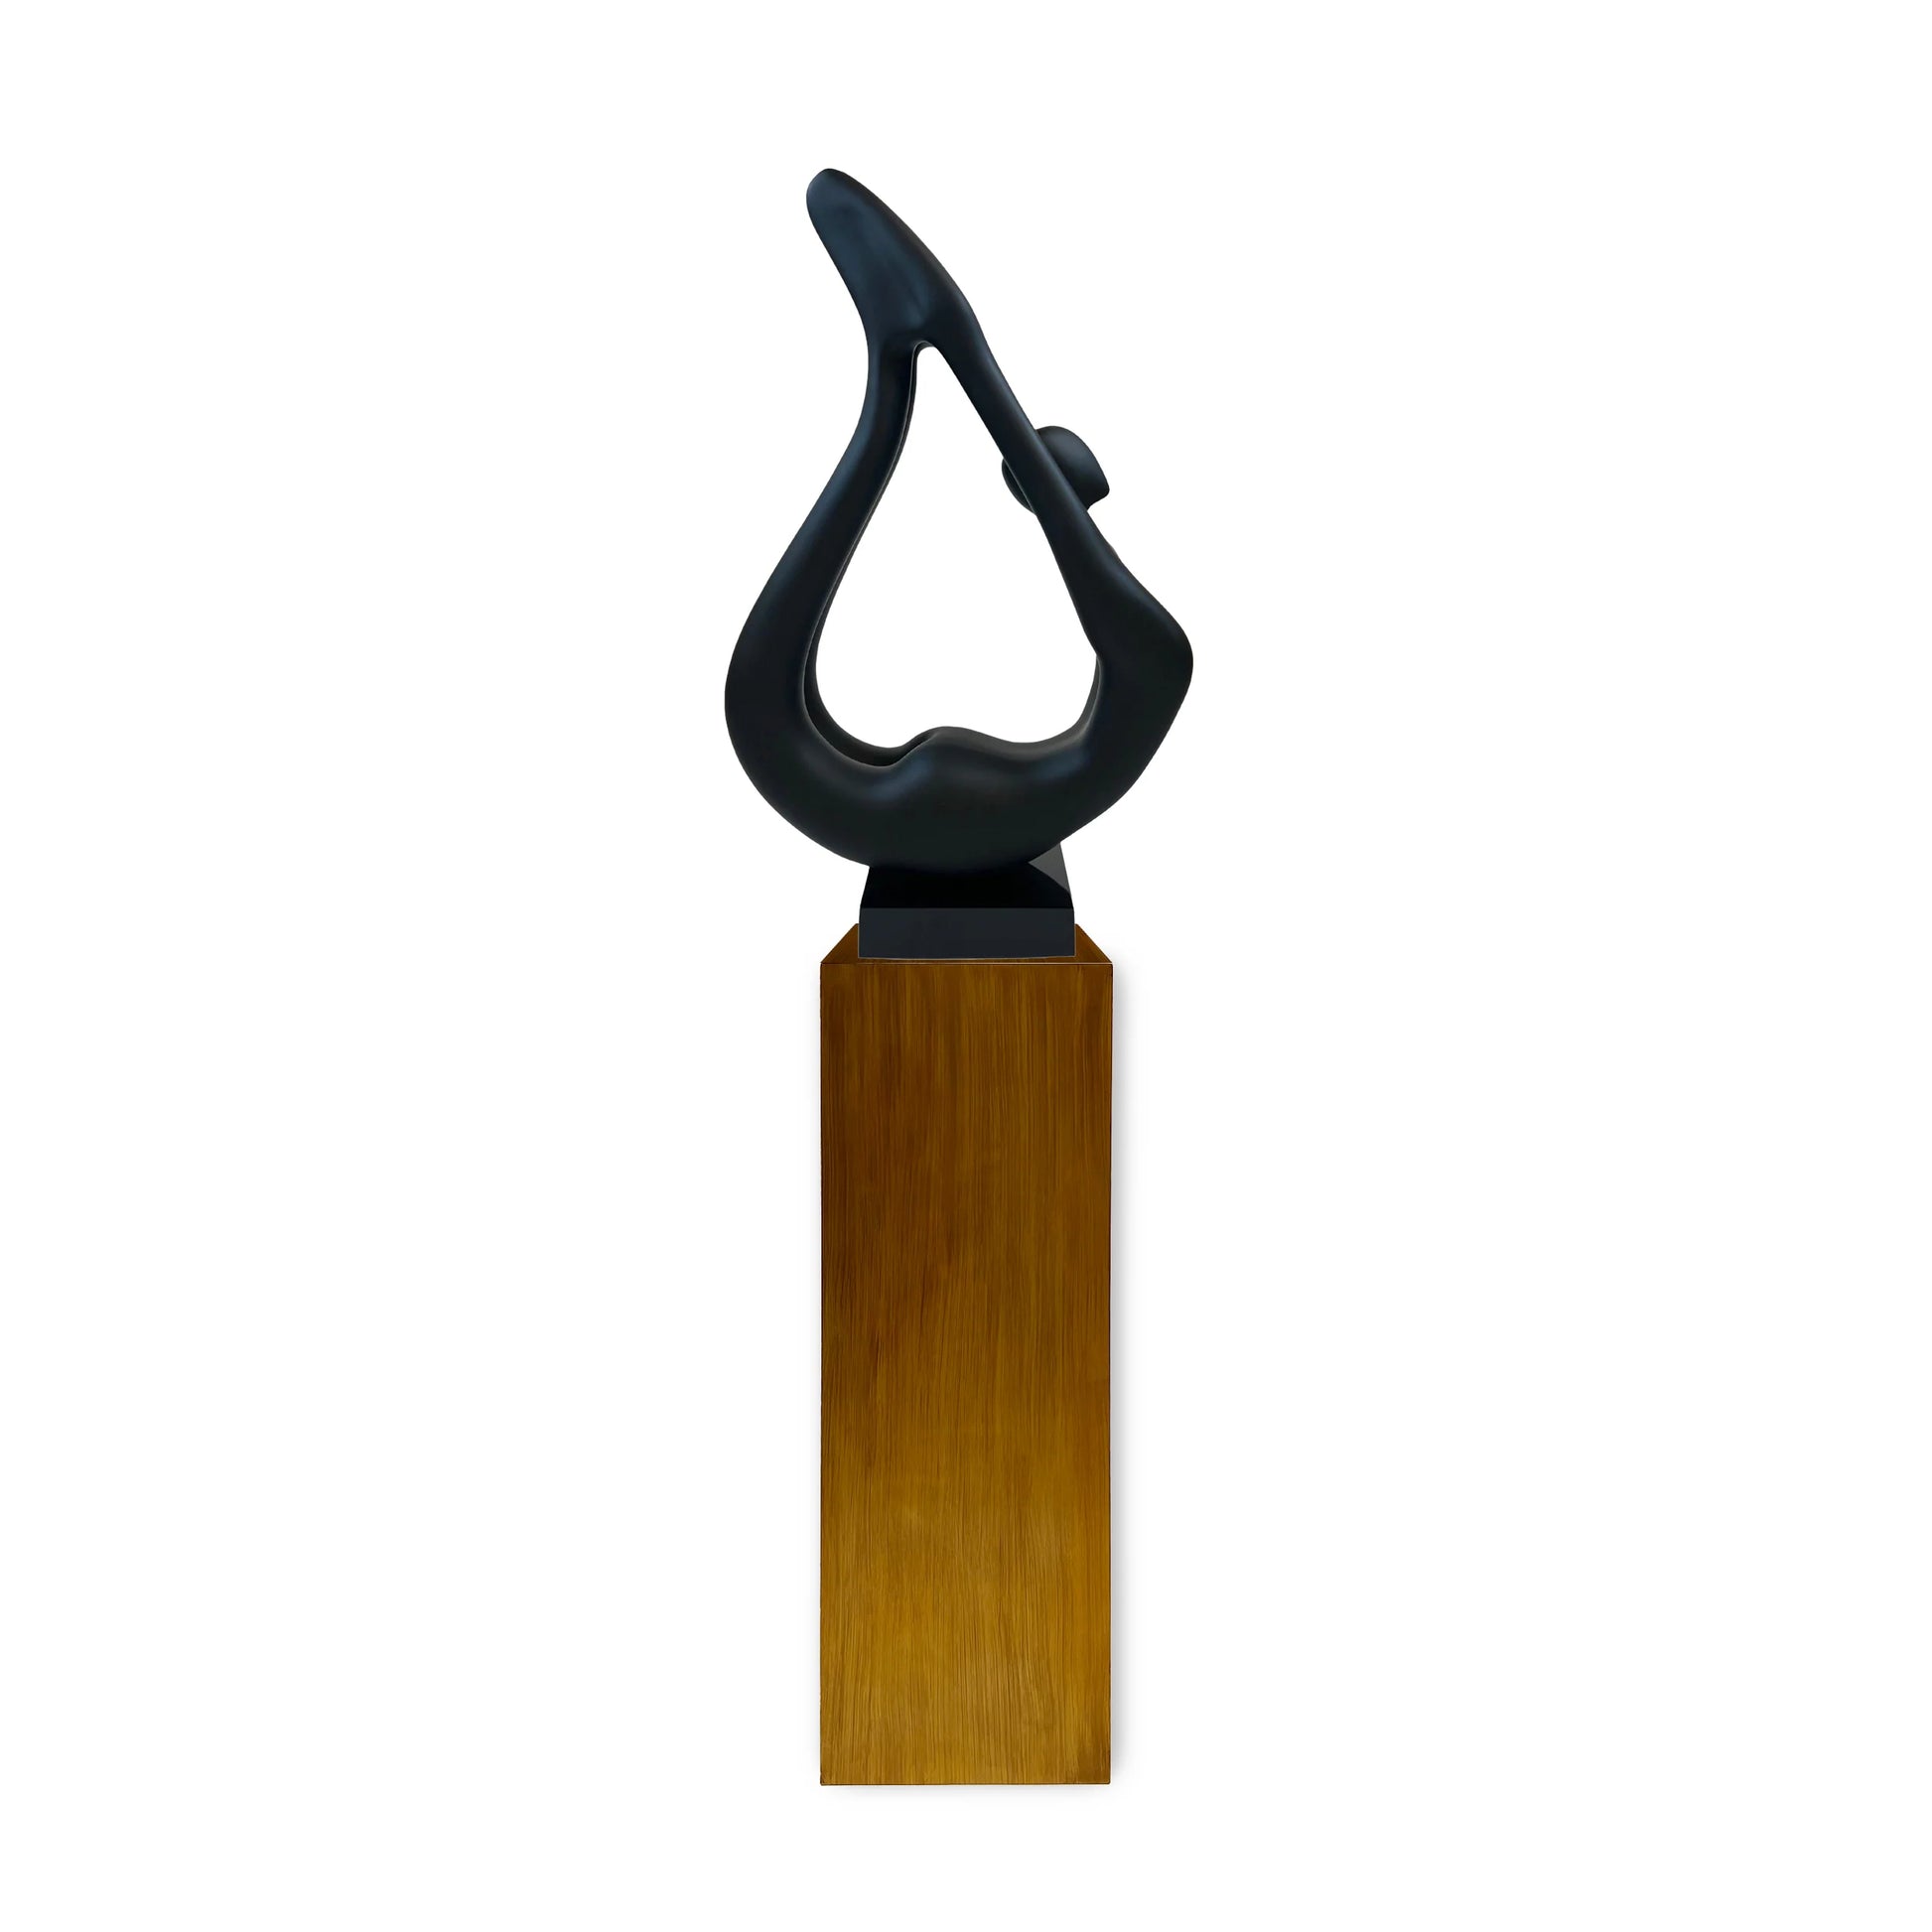 Finesse Decor Yoga Black Sculpture with Wood Base 1